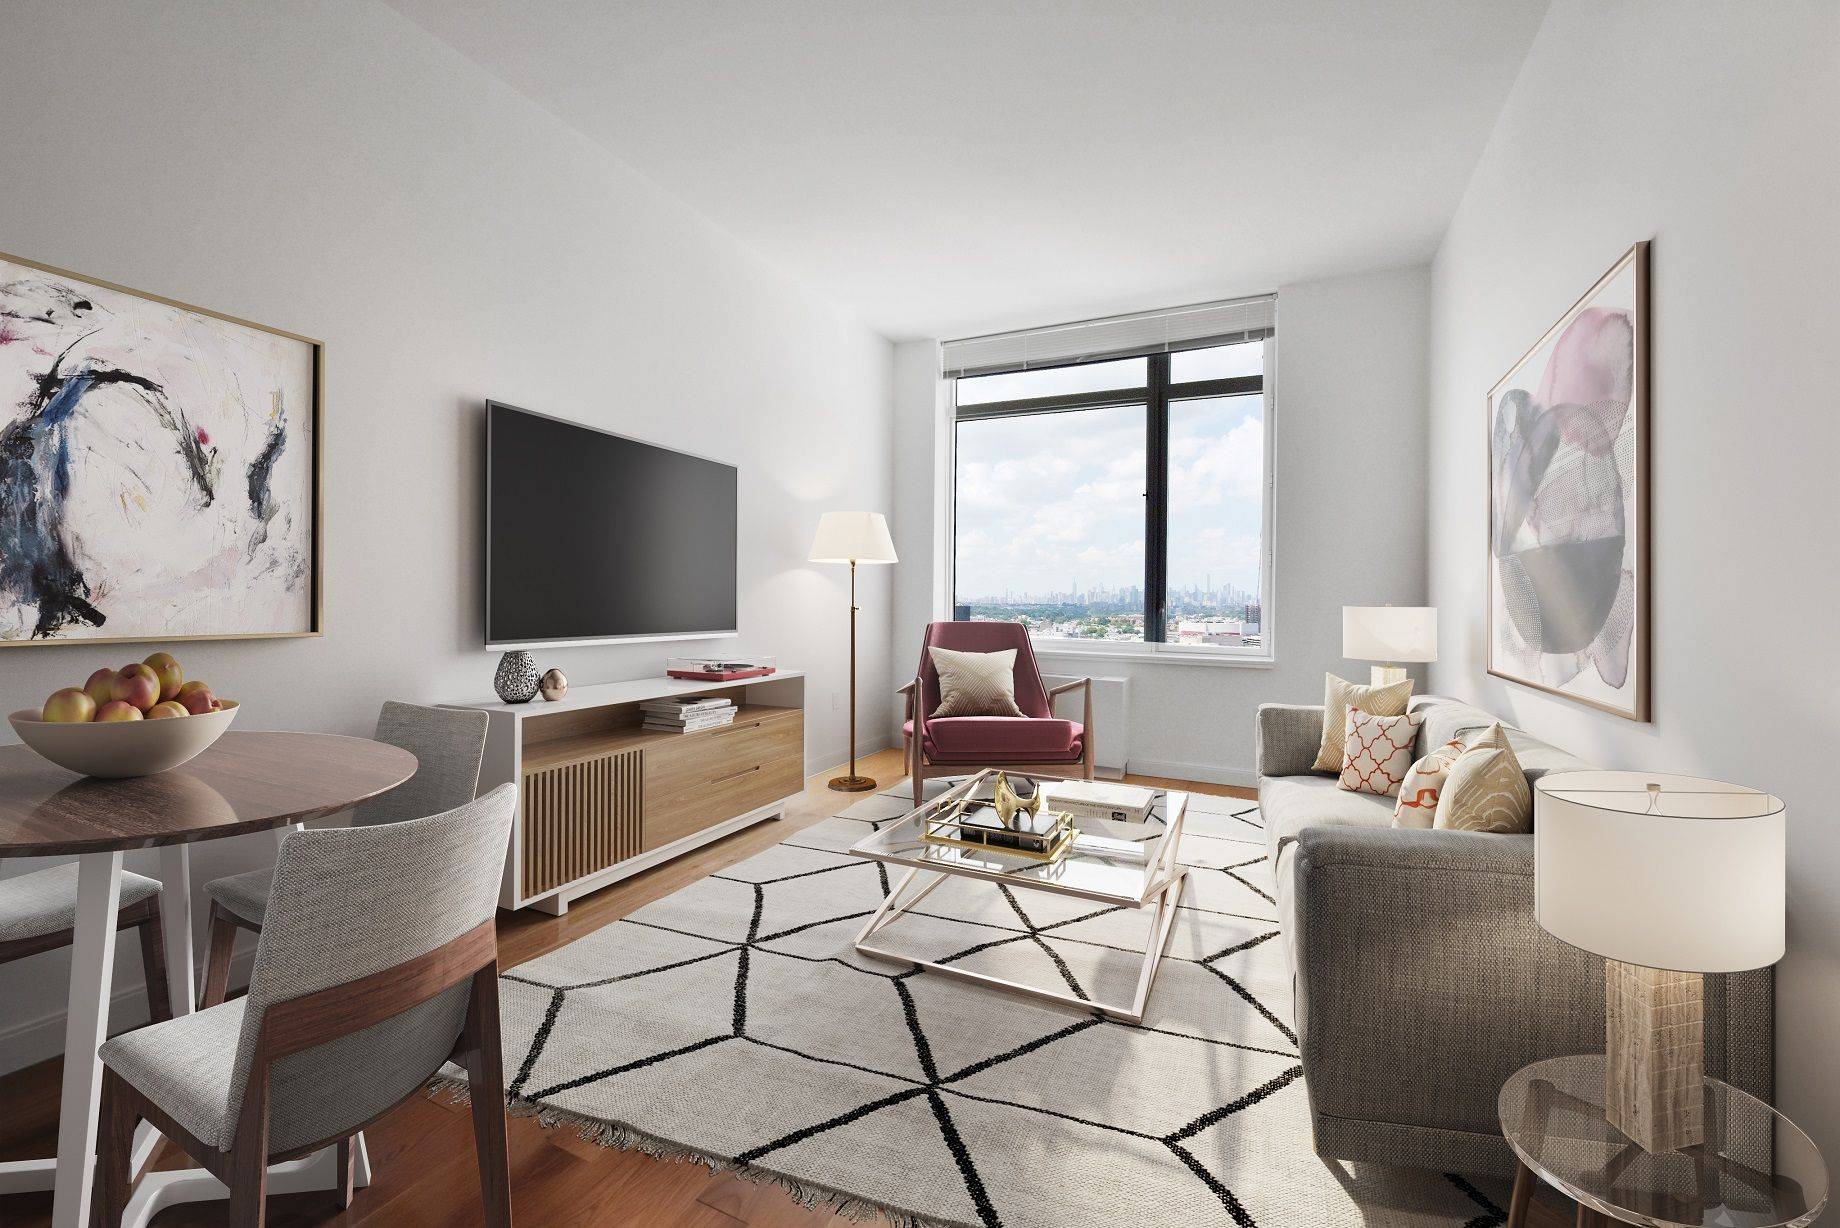 Incredible 1 bedroom with over sized windows showcasing NYC skyline views, a gourmet kitchen featuring stainless steel appliances, Caesarstone quartz countertops, eating bar, and an in unit washer dryer.